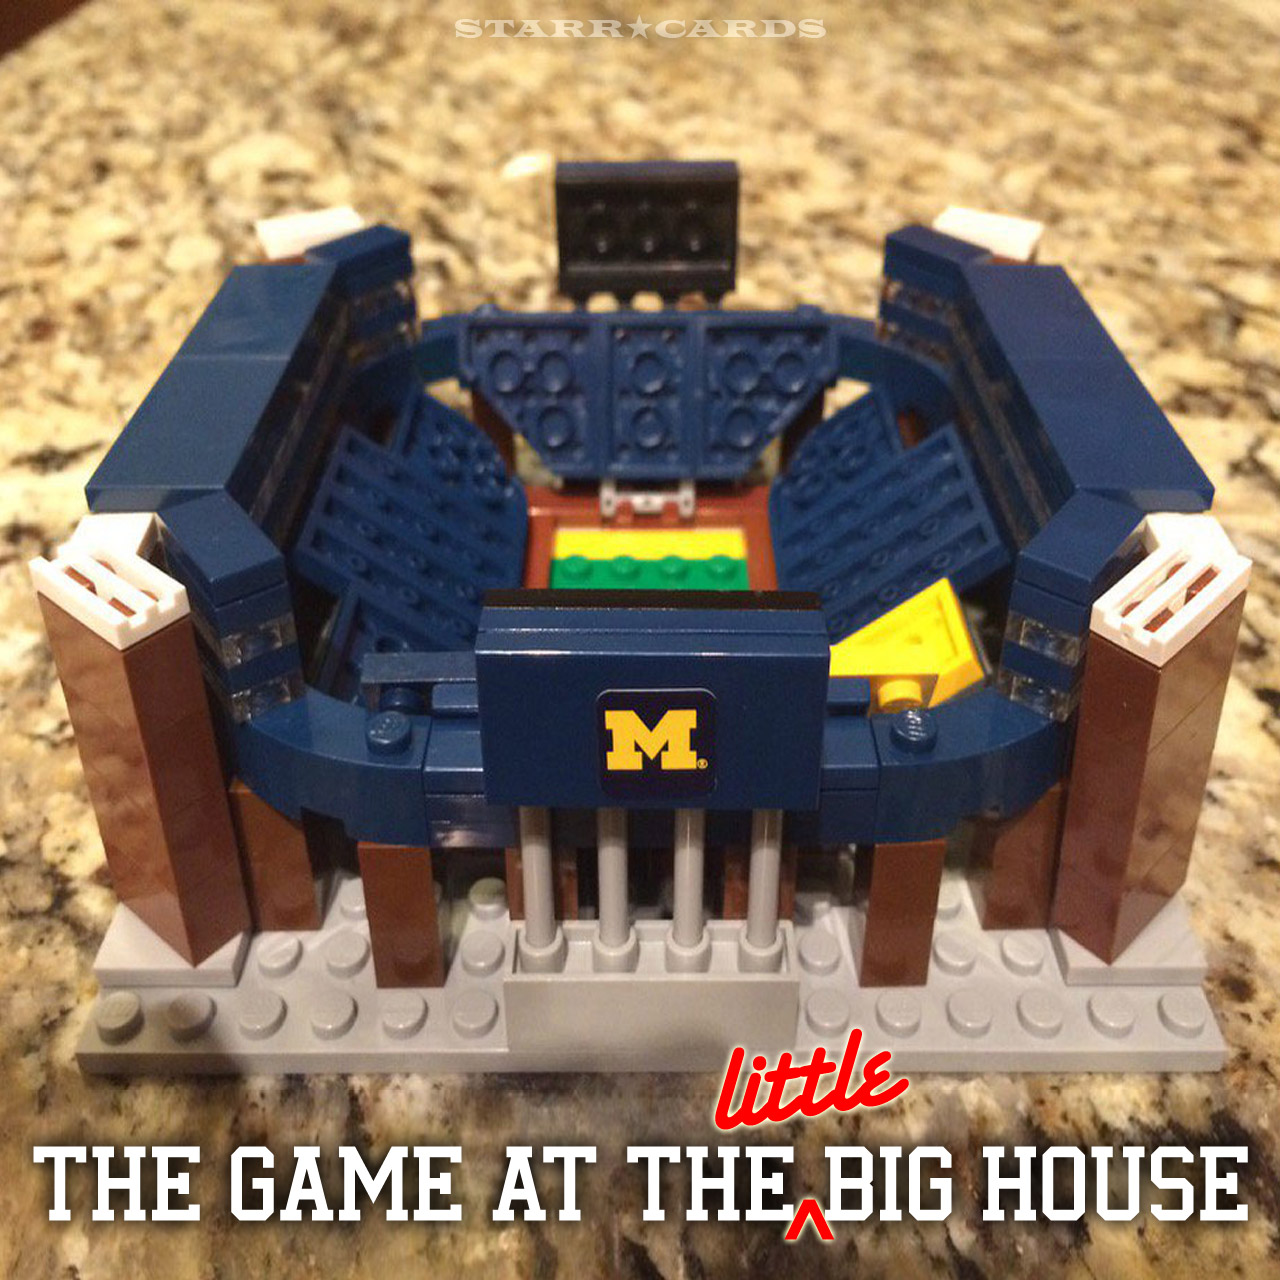 Ohio State vs Michigan: The Game at the Big House